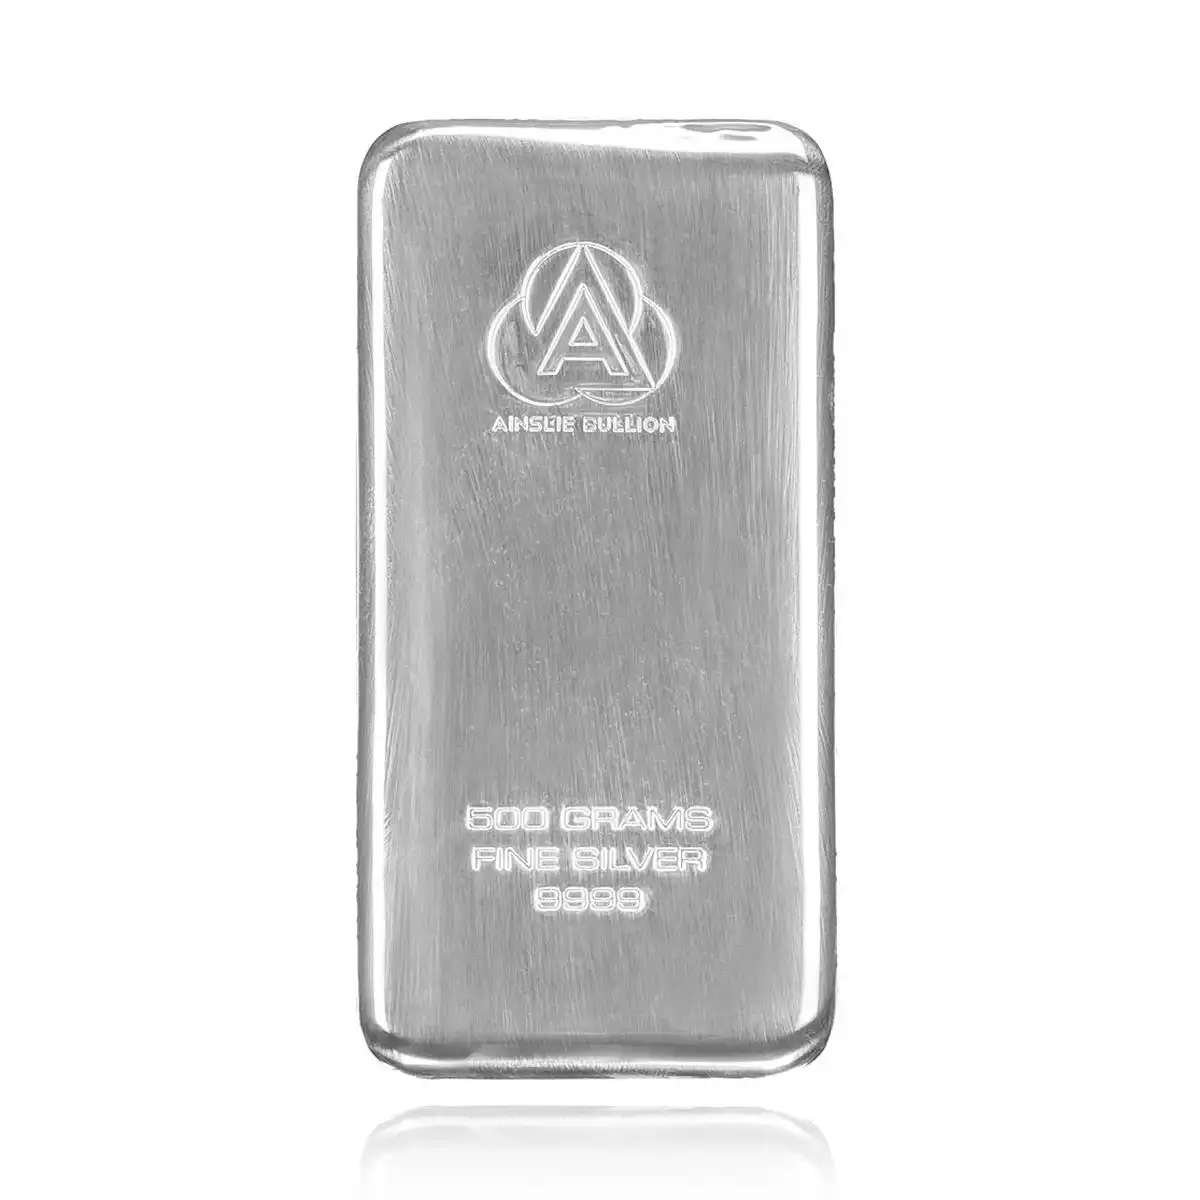 1/2kg ainslie silver bullion. the sleek dimensions combined with the smooth and shiny finish makes the 1/2kg cast bar a favourite amongst many investo...